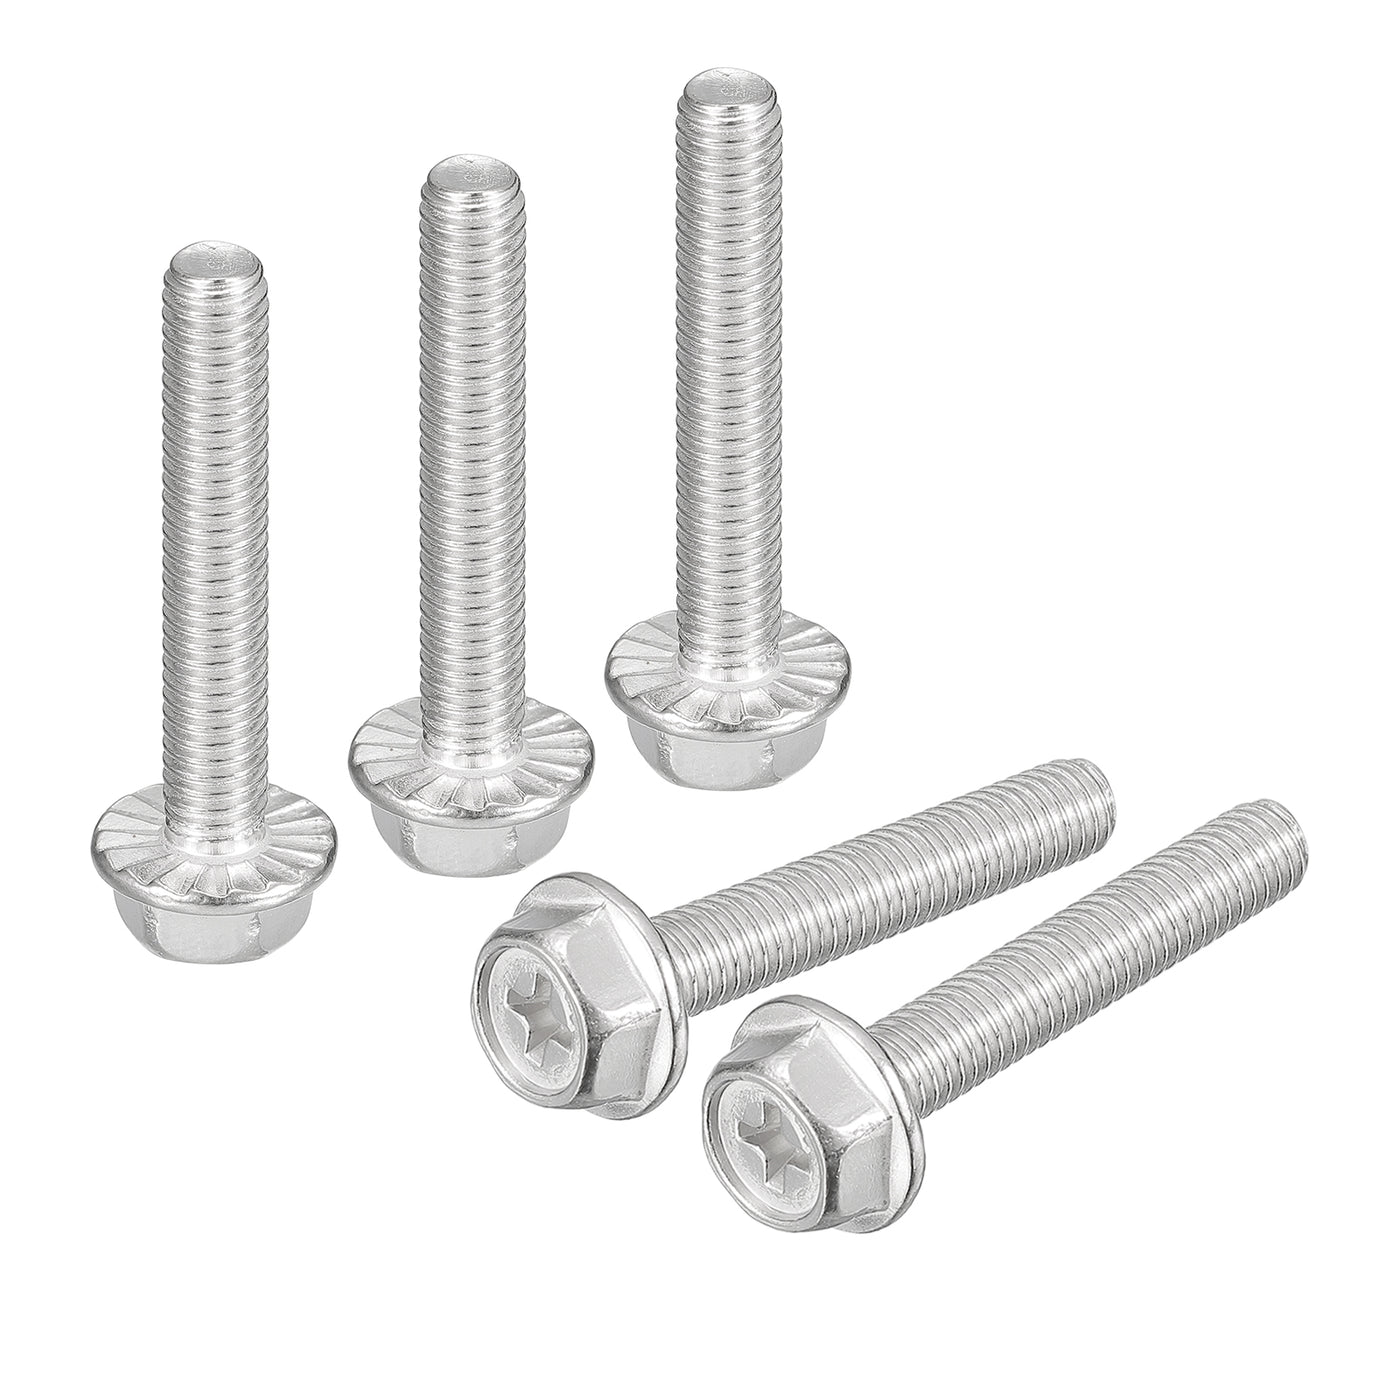 uxcell Uxcell M6x35mm Phillips Hex Head Flange Bolts, 20pcs 304 Stainless Steel Screws